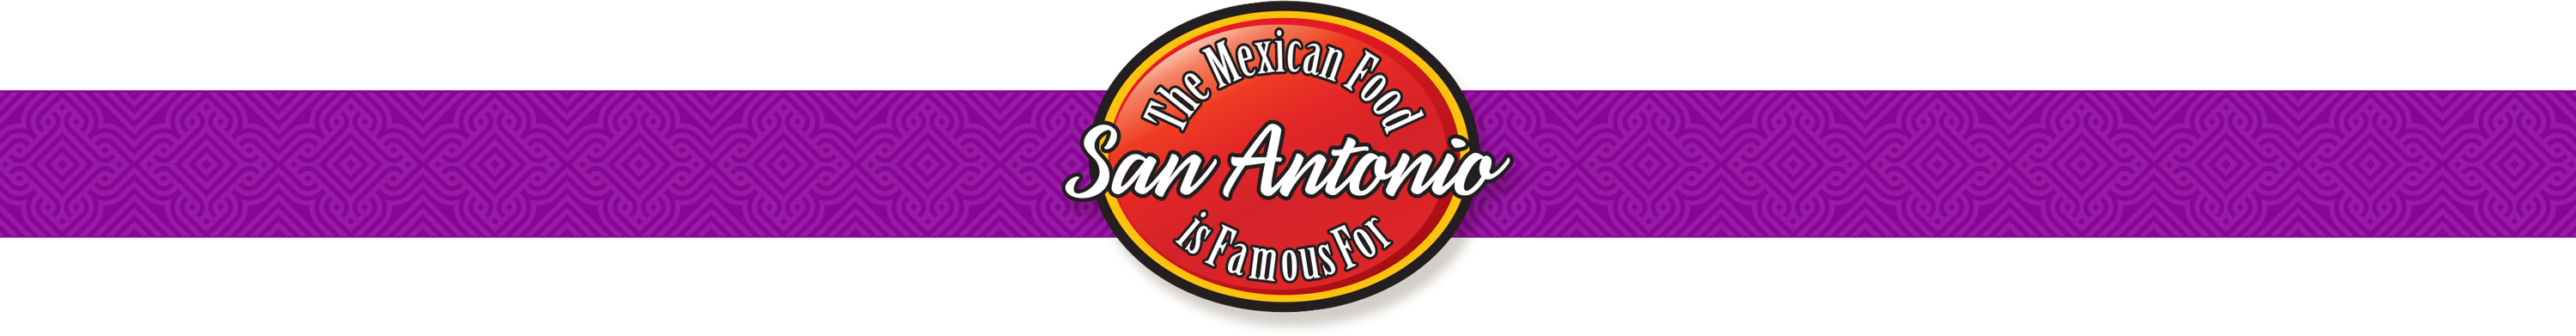 The Mexican Food San Antonio is Famous For